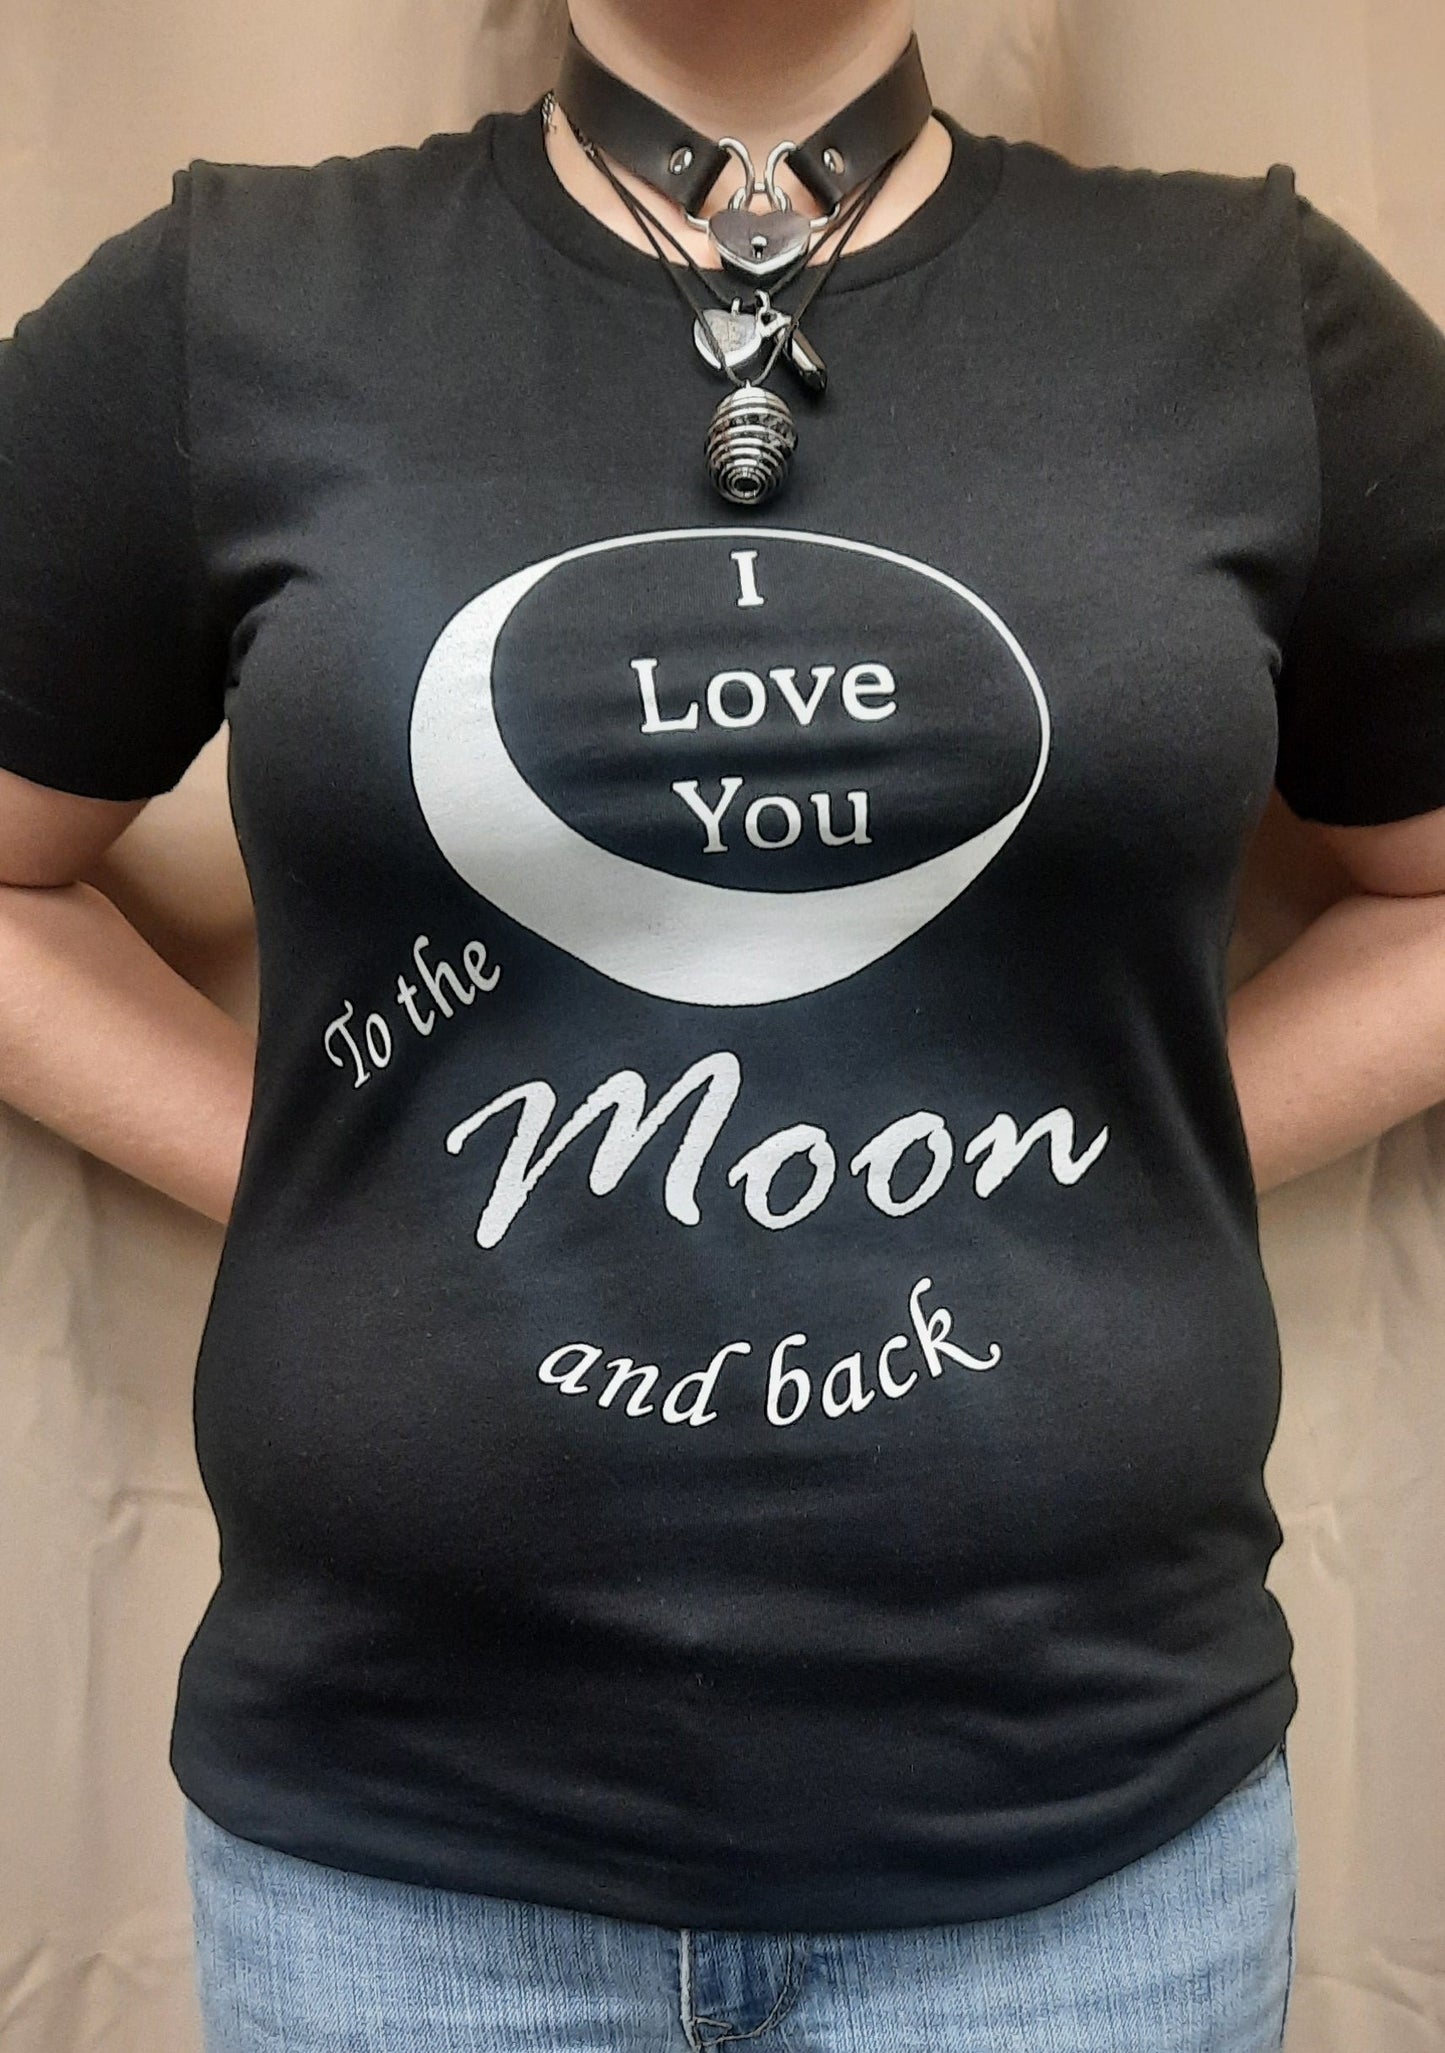 Bella Canvas short sleeve T-Shirt, size medium.  "I love you to the moon and back" design.